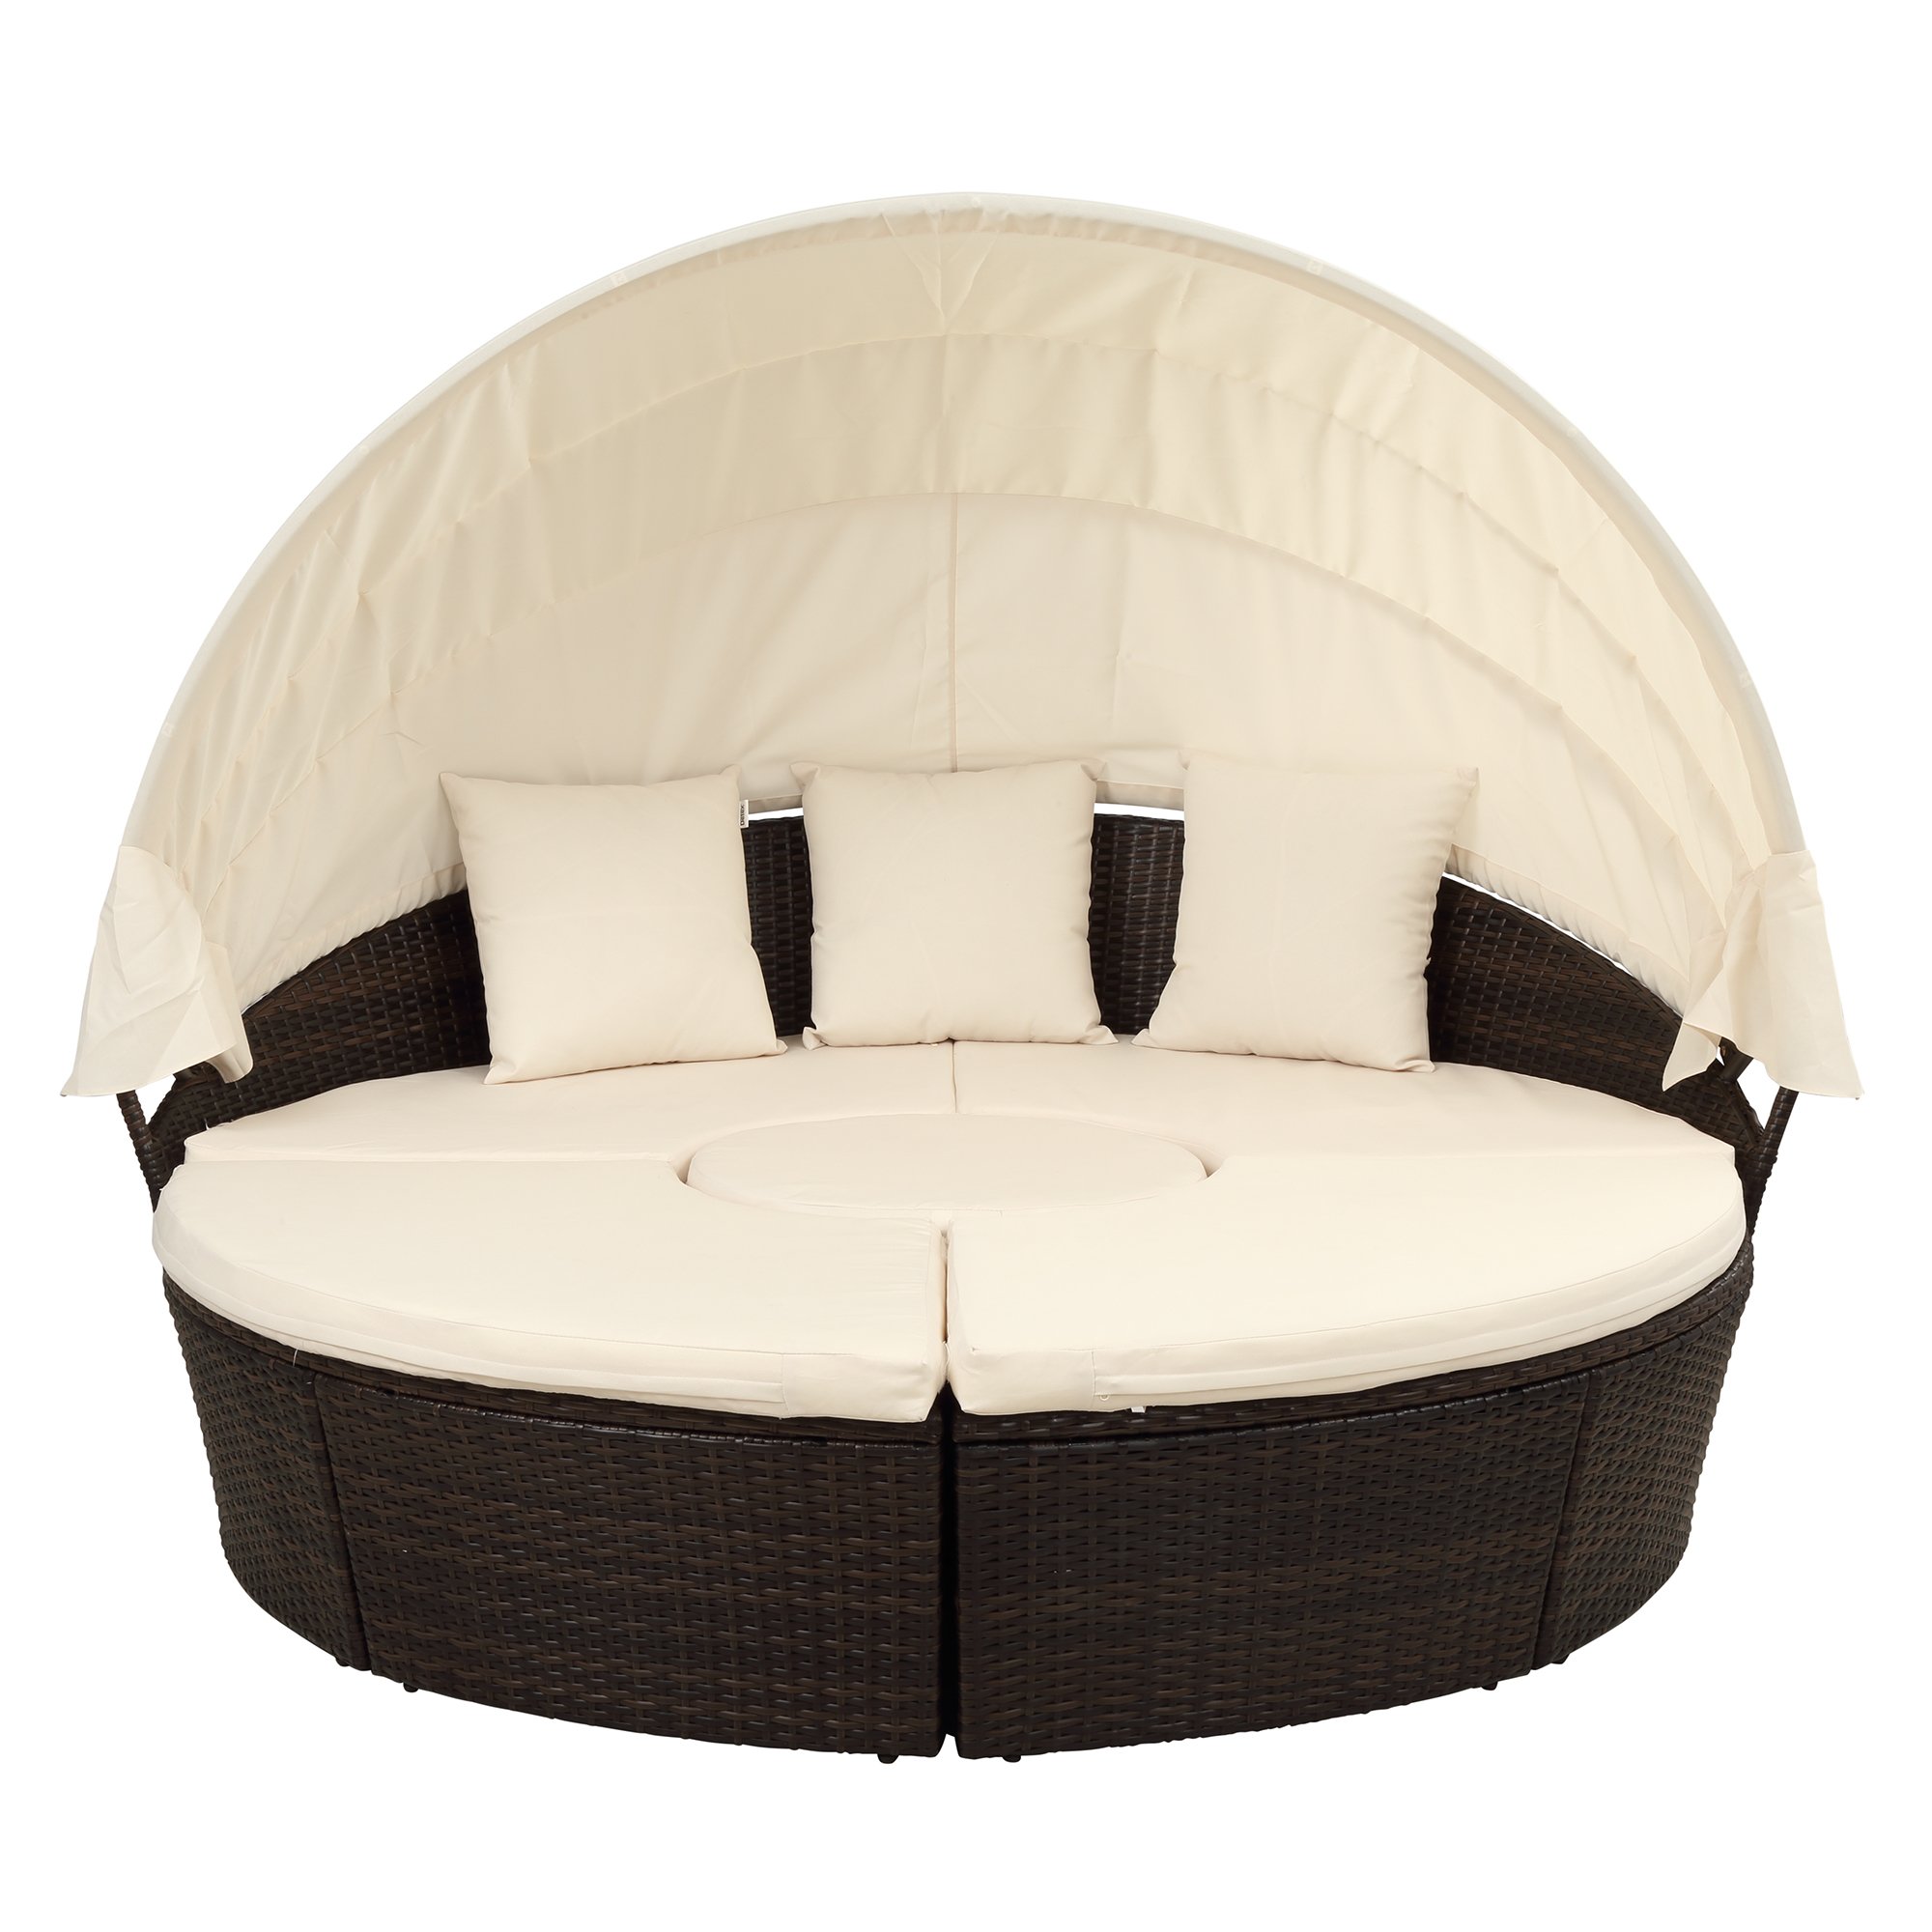 Patio Furniture Round Wicker Outdoor Daybed Sunbed with Retractable Canopy with Cushion-CASAINC